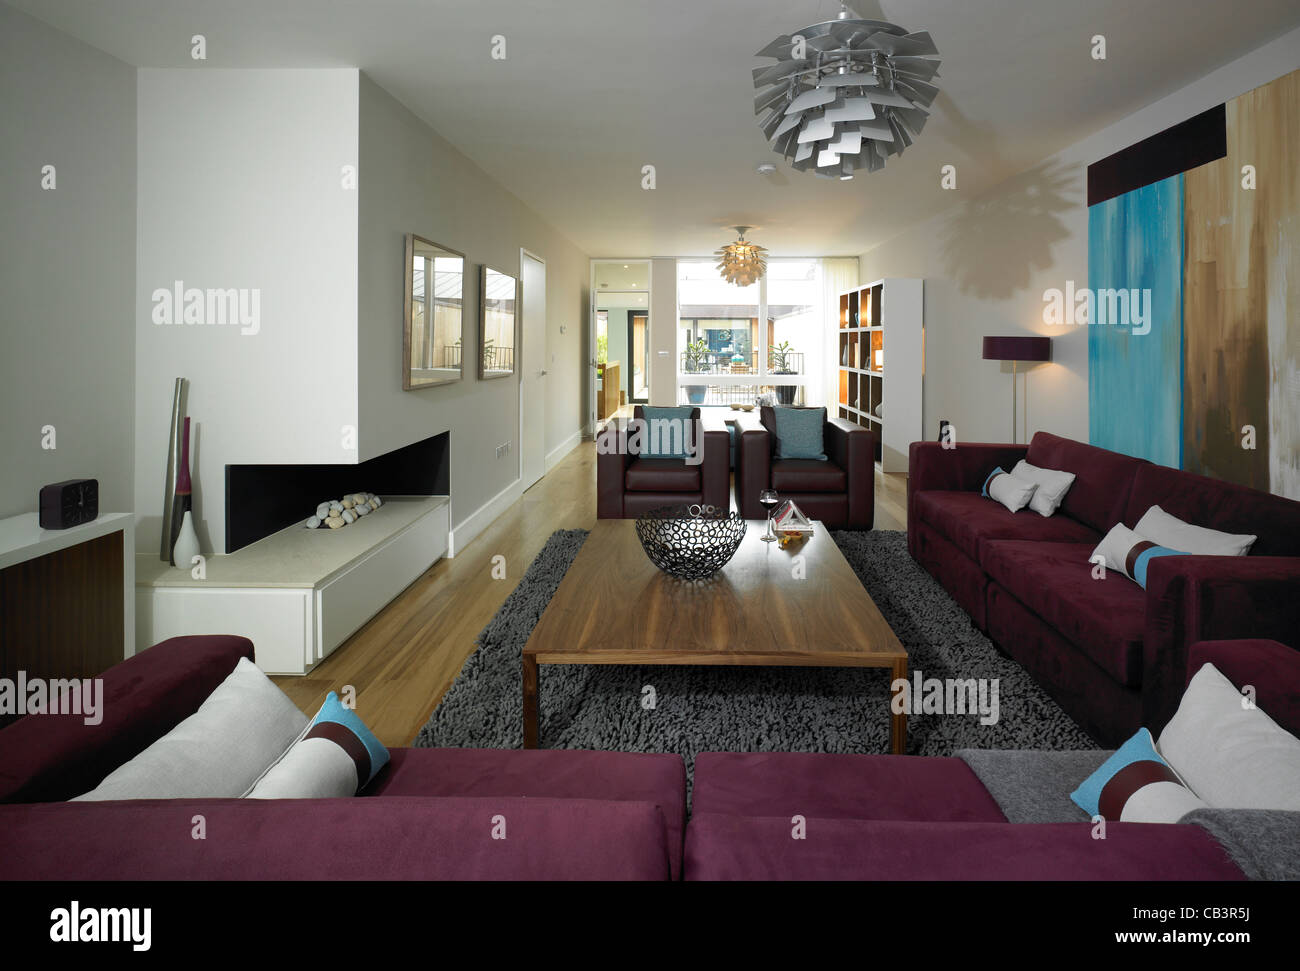 Living room area of modern home Stock Photo